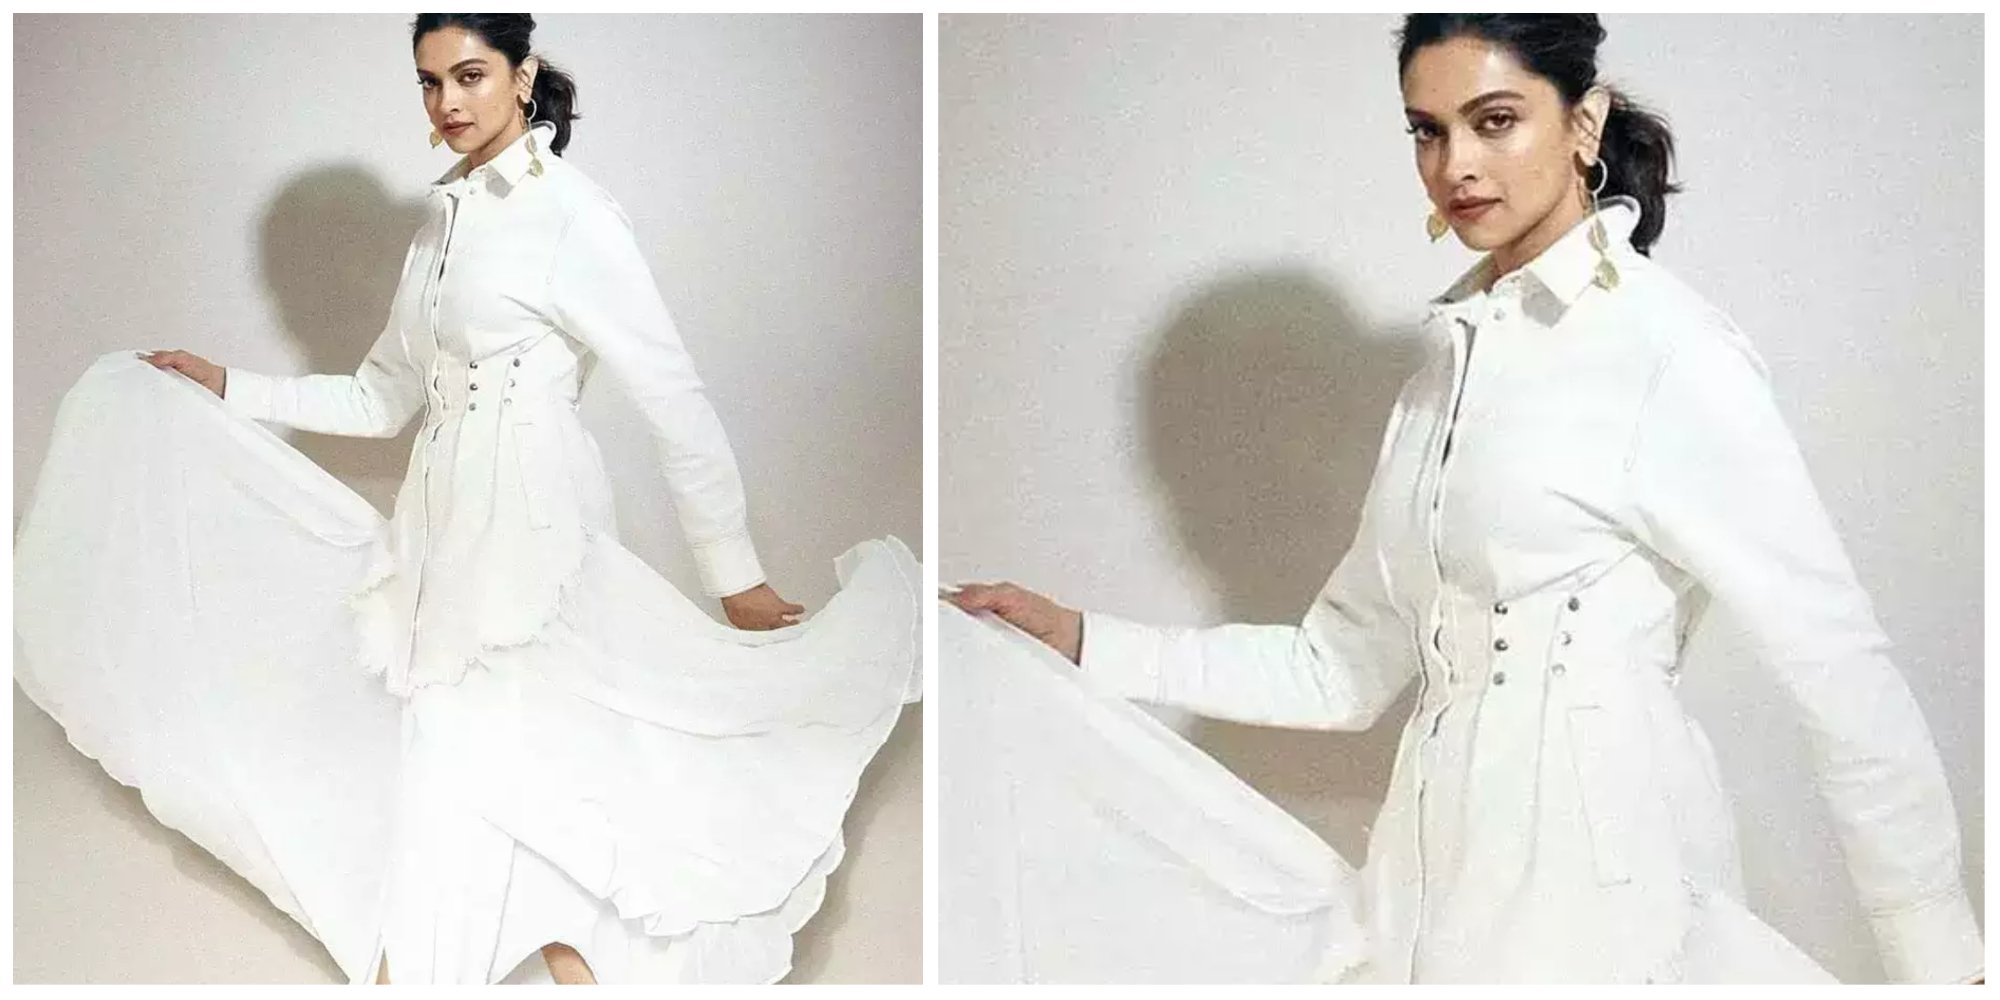 Deepika Padukone in long white shirt paired with a skirt